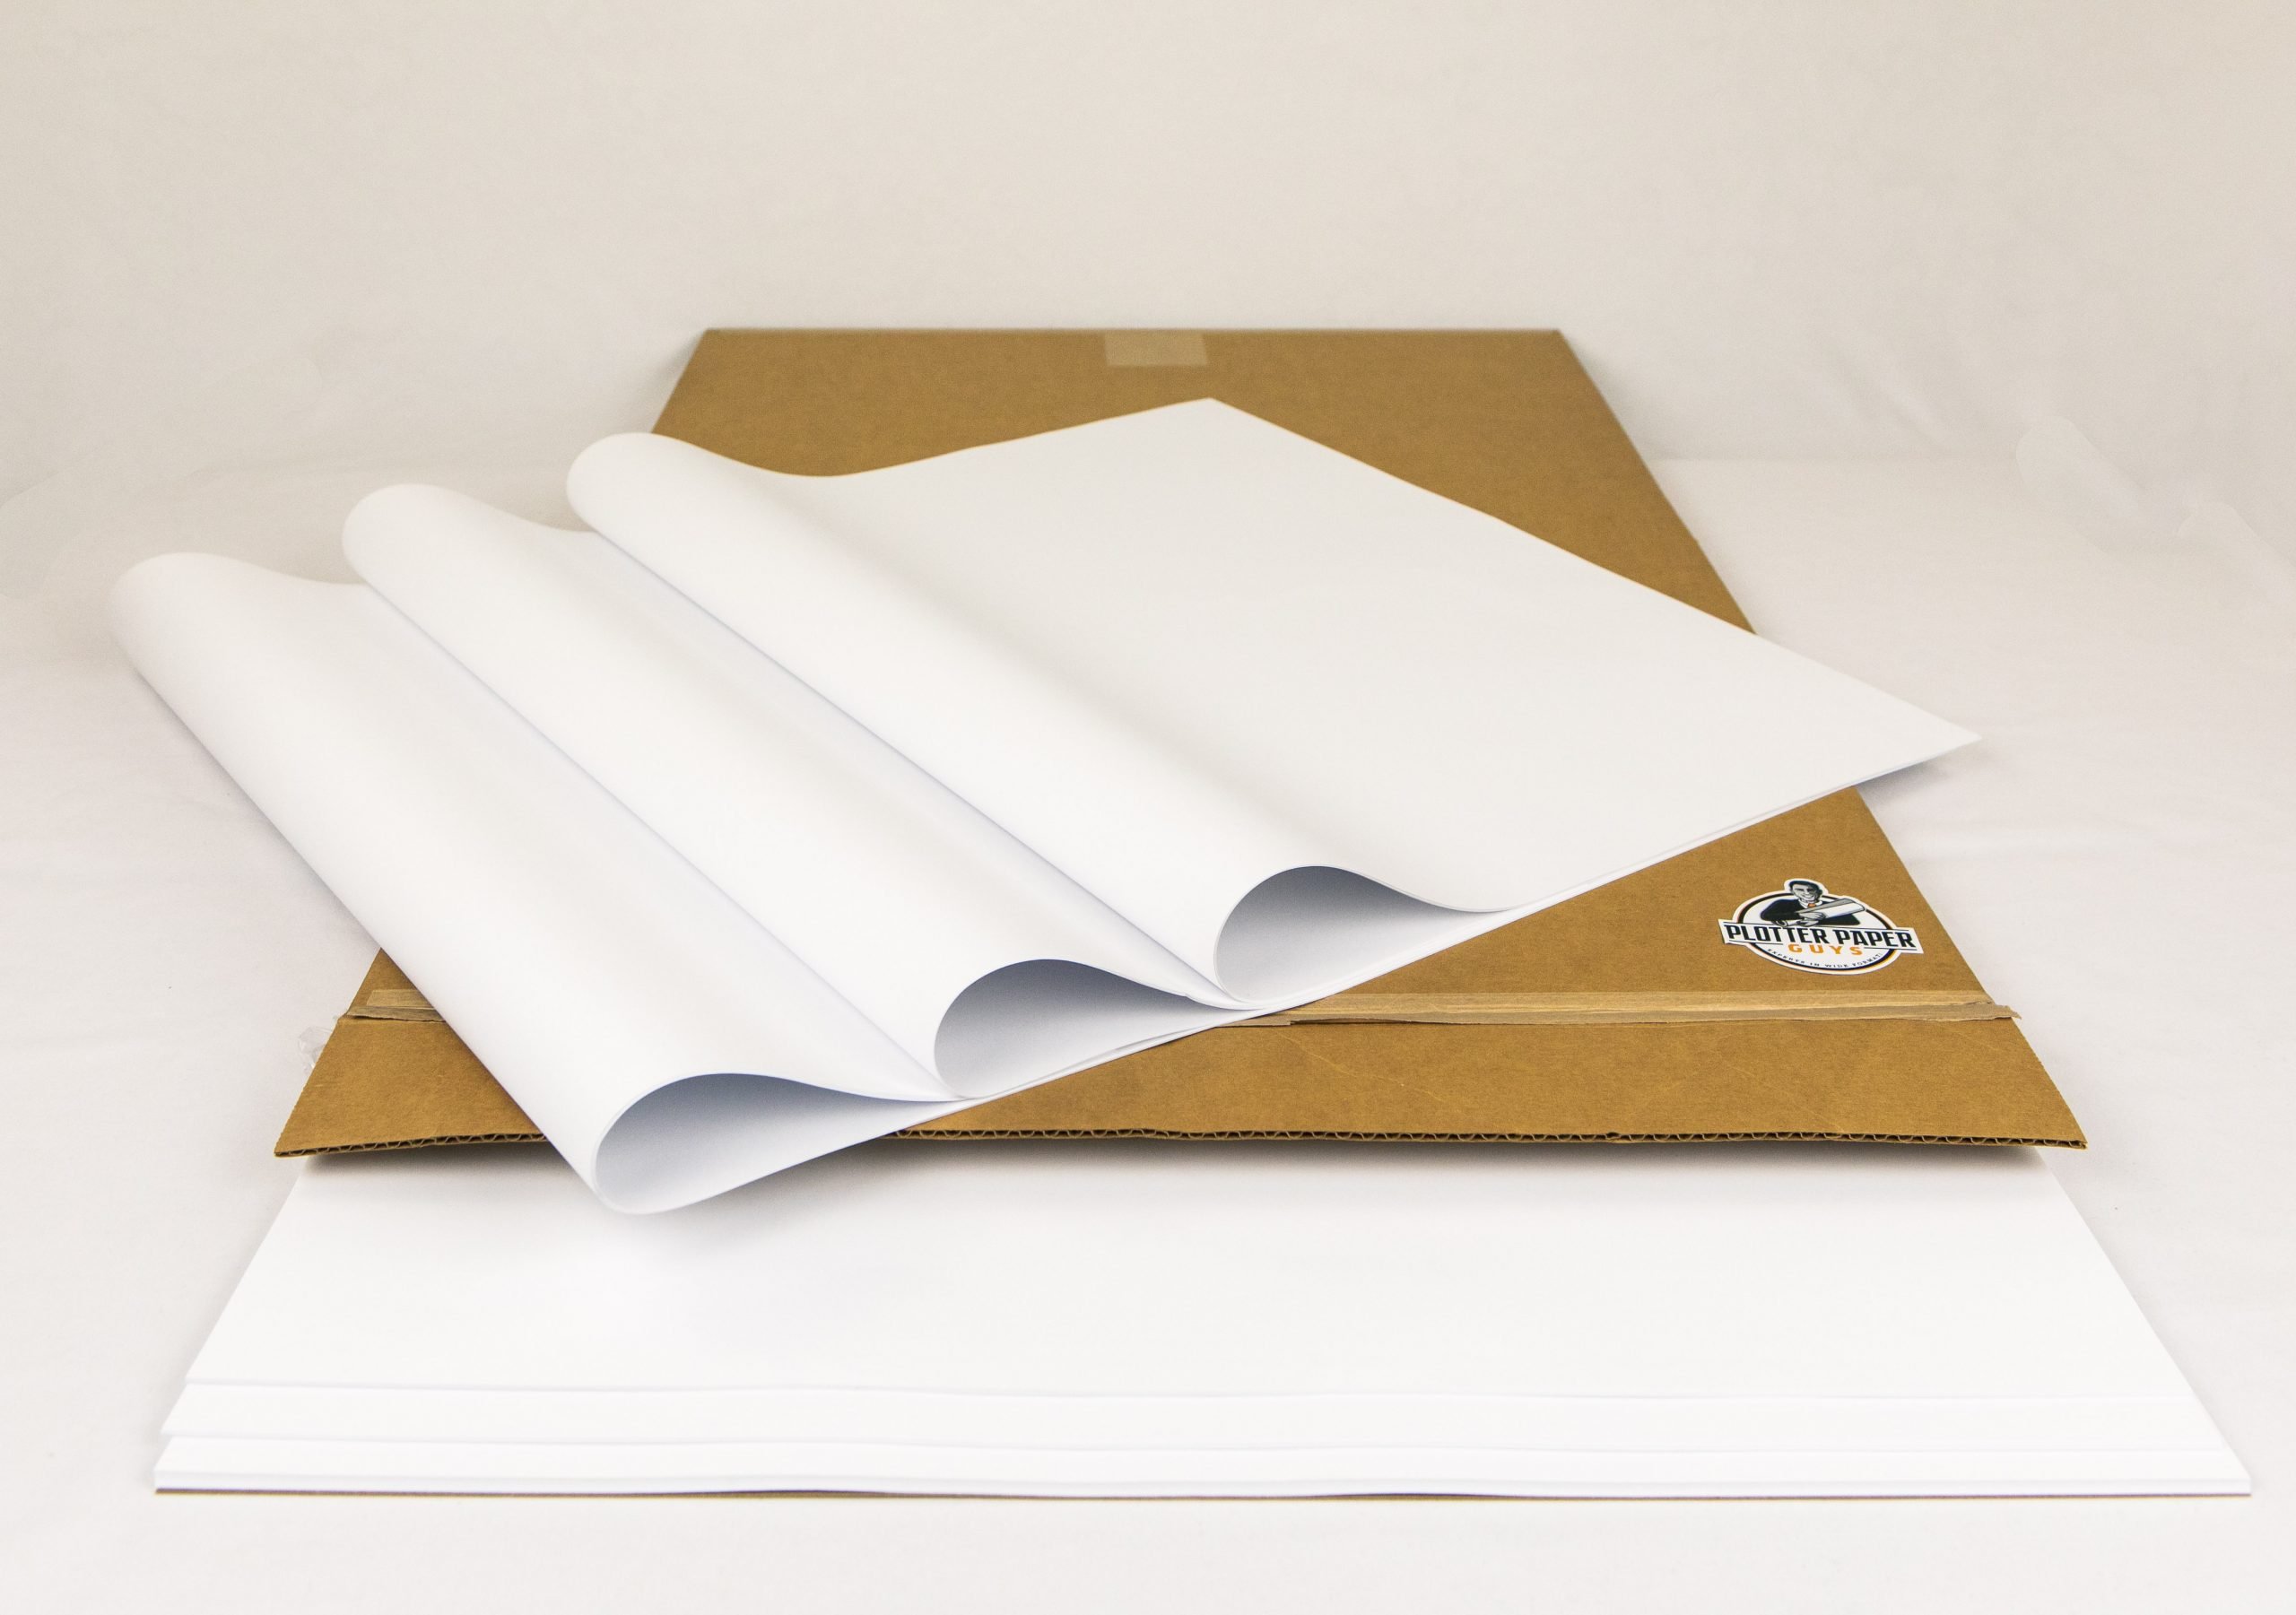 Bright White Paper - 12 x 18 in 24 lb Writing